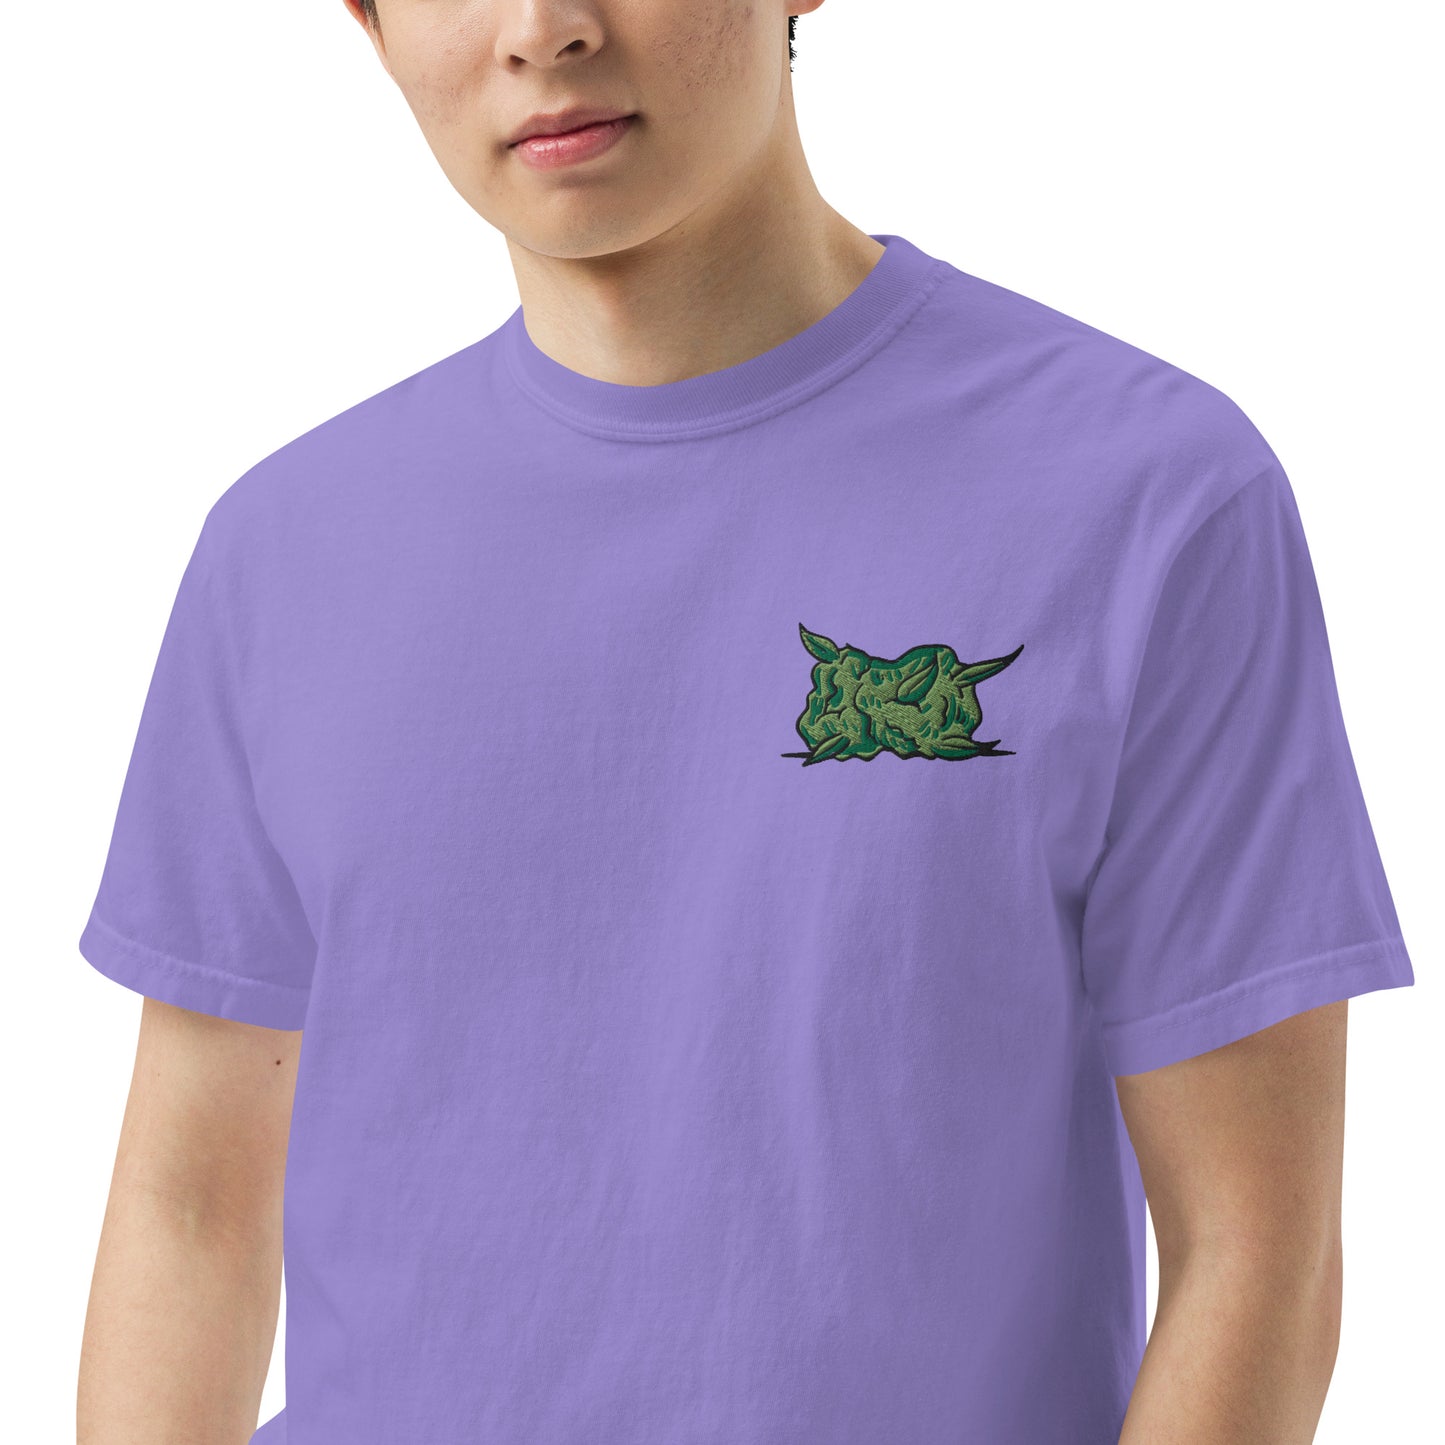 "Nug" Embroidered Garment-Dyed Heavyweight Tee